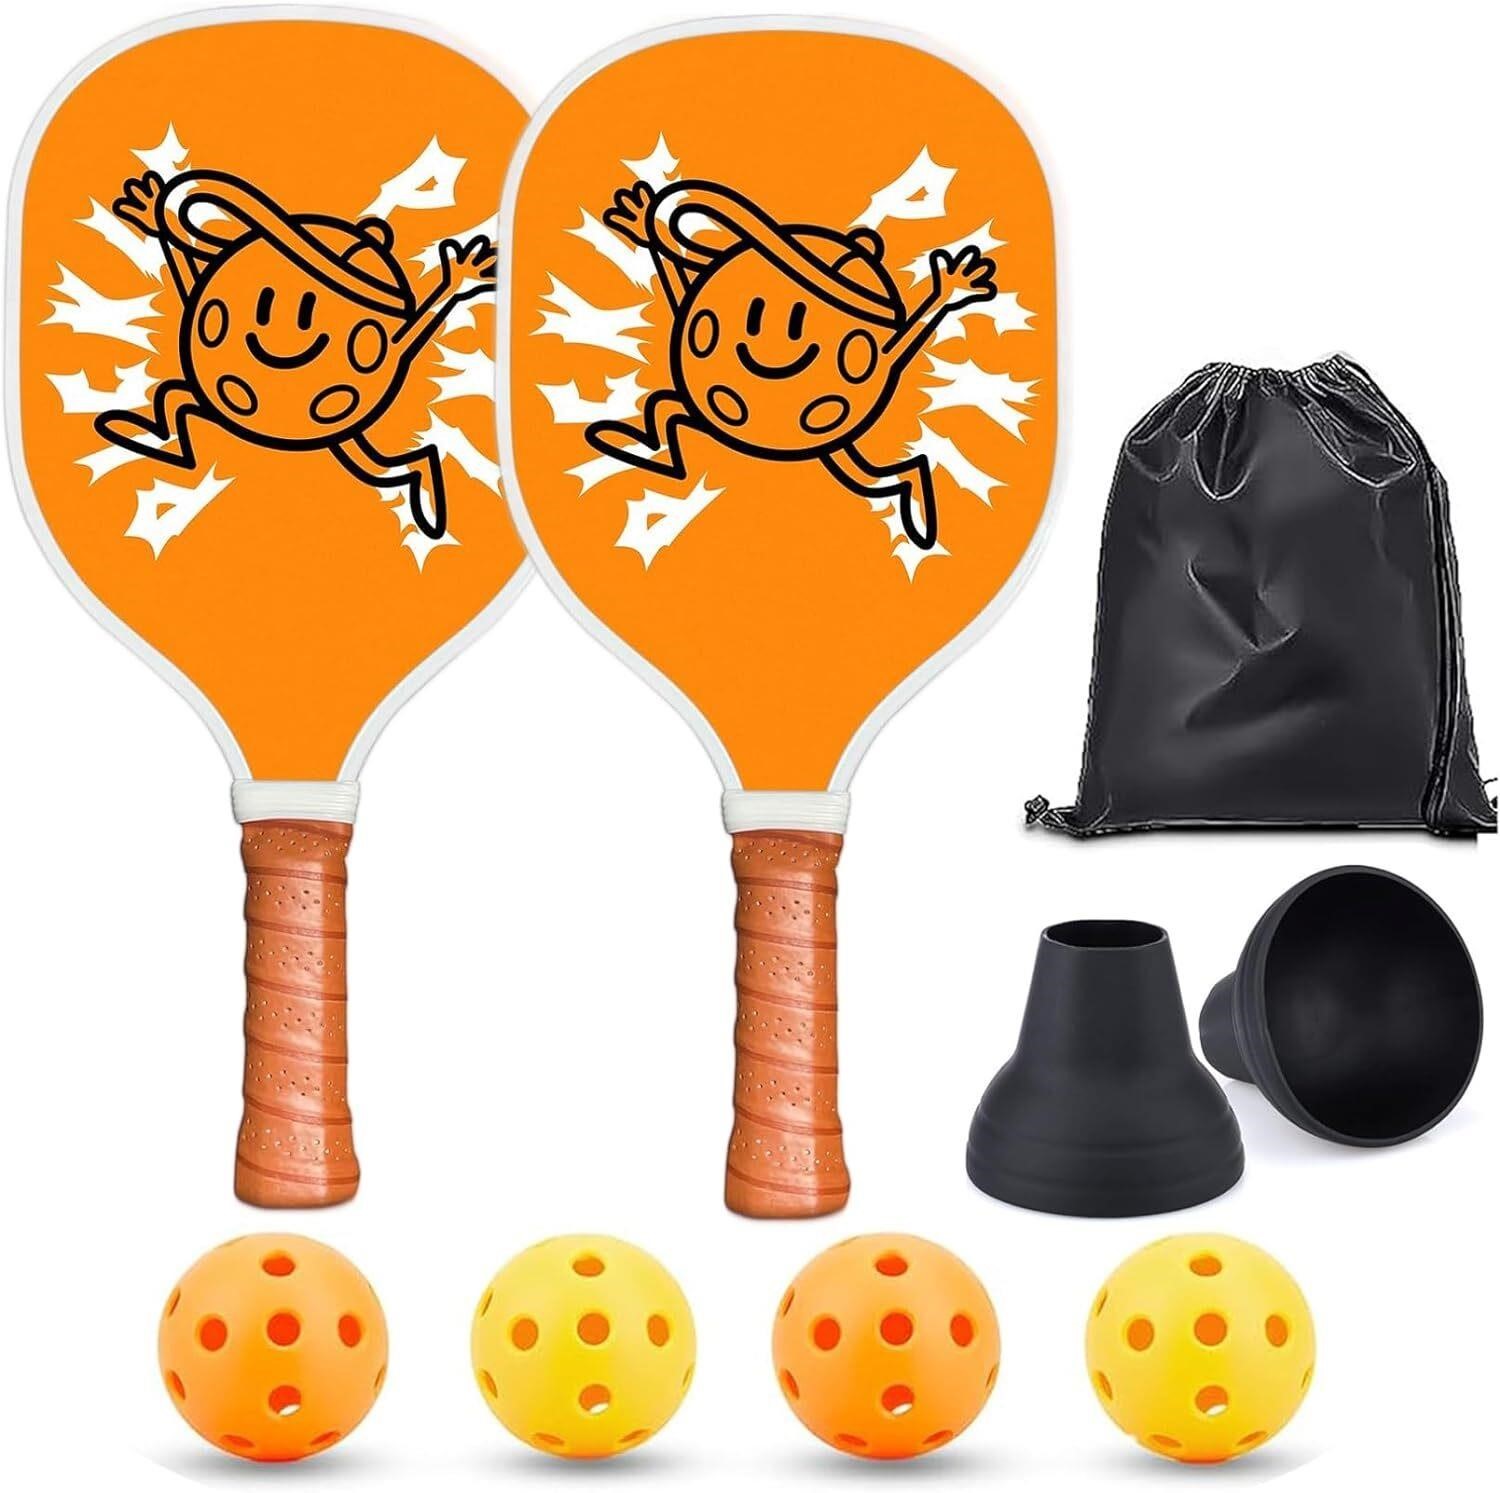 $20  Pickleball Paddles Set of 2 with Accessories